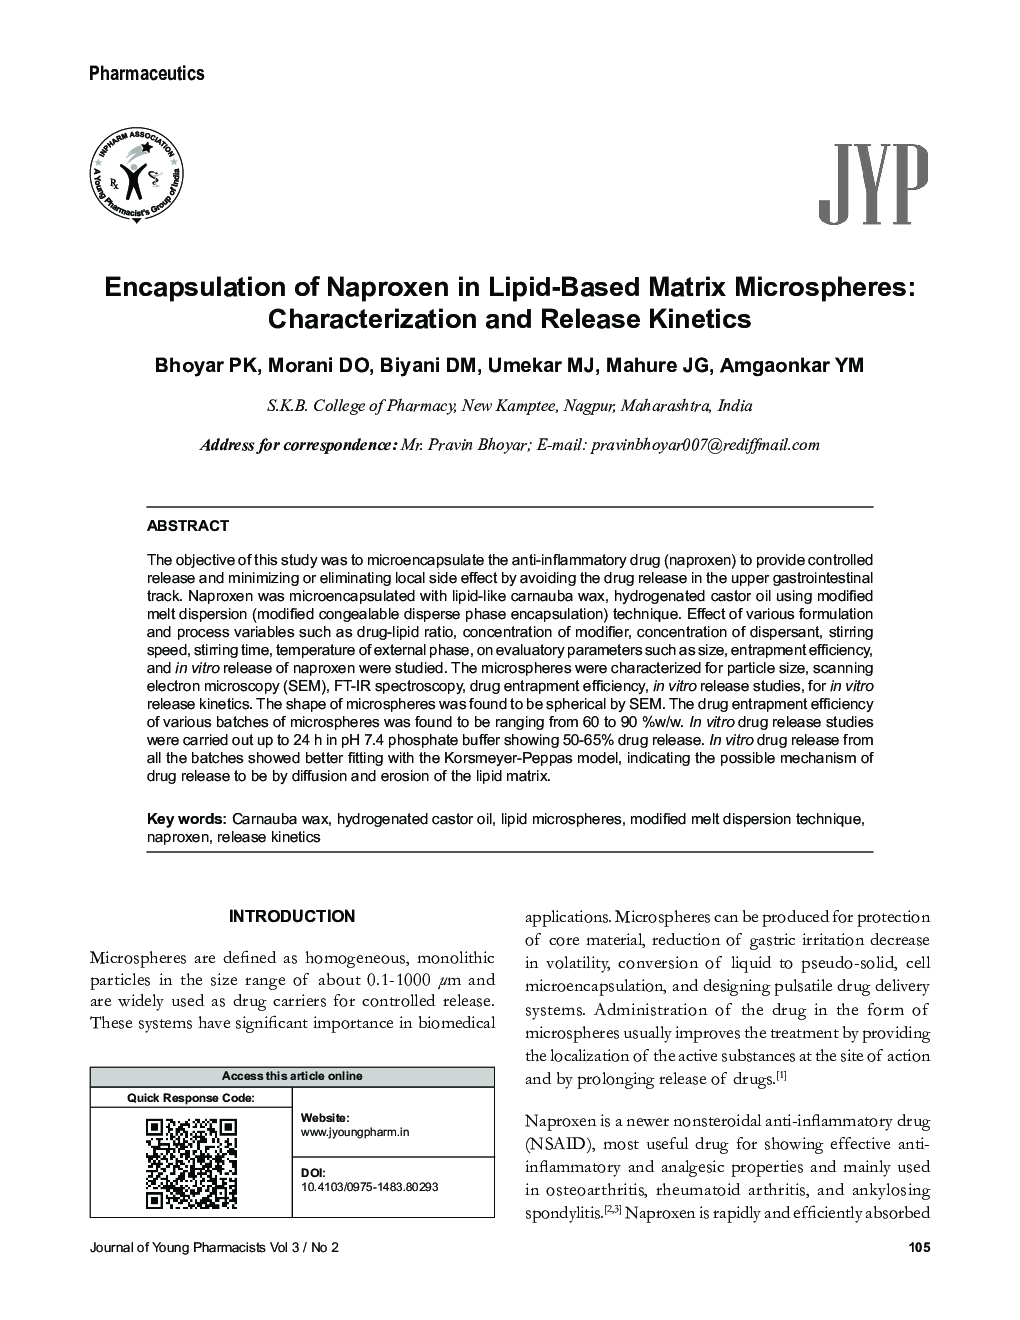 Encapsulation of Naproxen in Lipid-Based Matrix Microspheres: Characterization and Release Kinetics